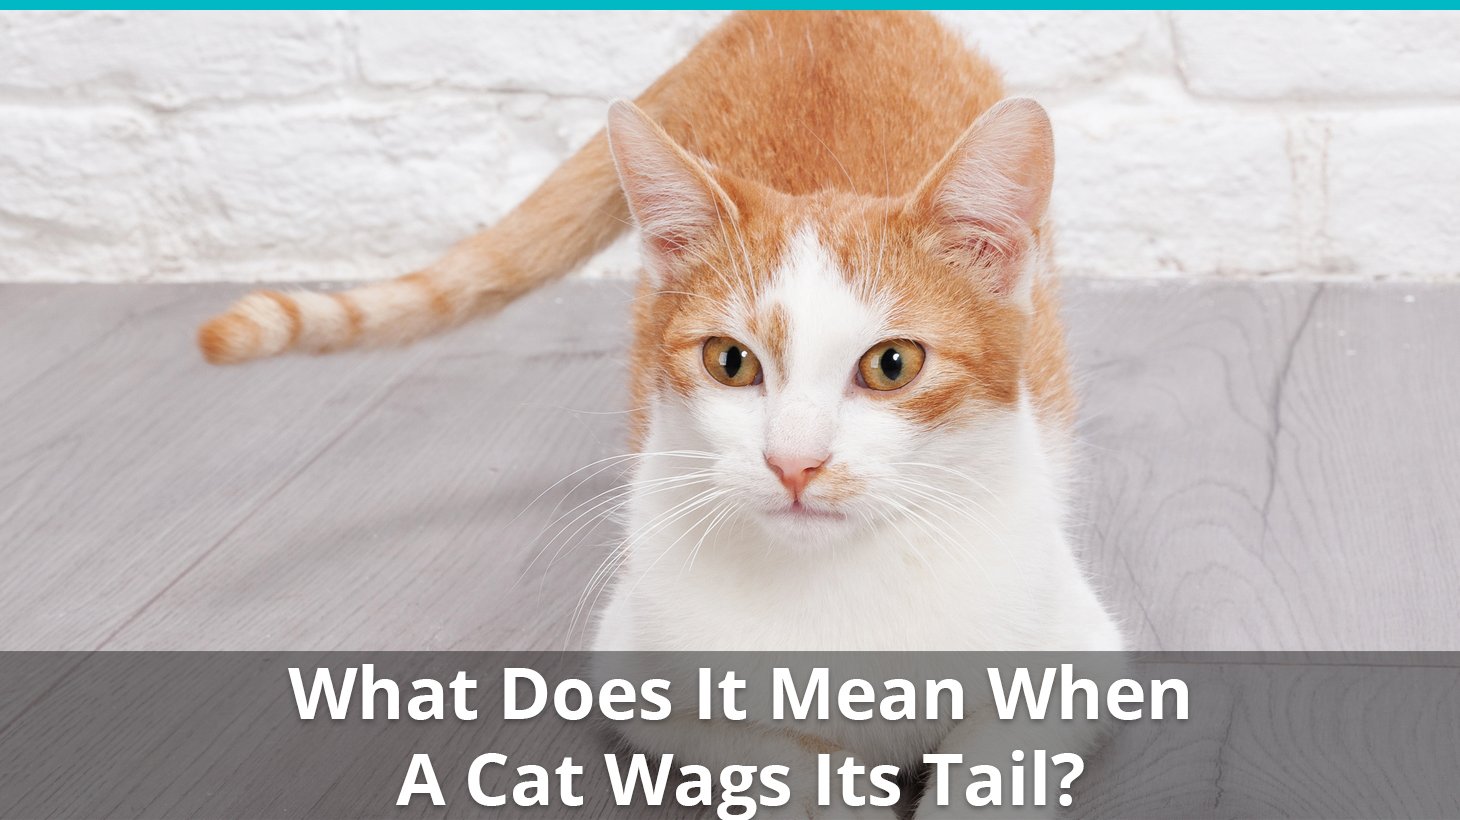 What Does It Mean When A Cat Wags Its Tail? Find Out Here!